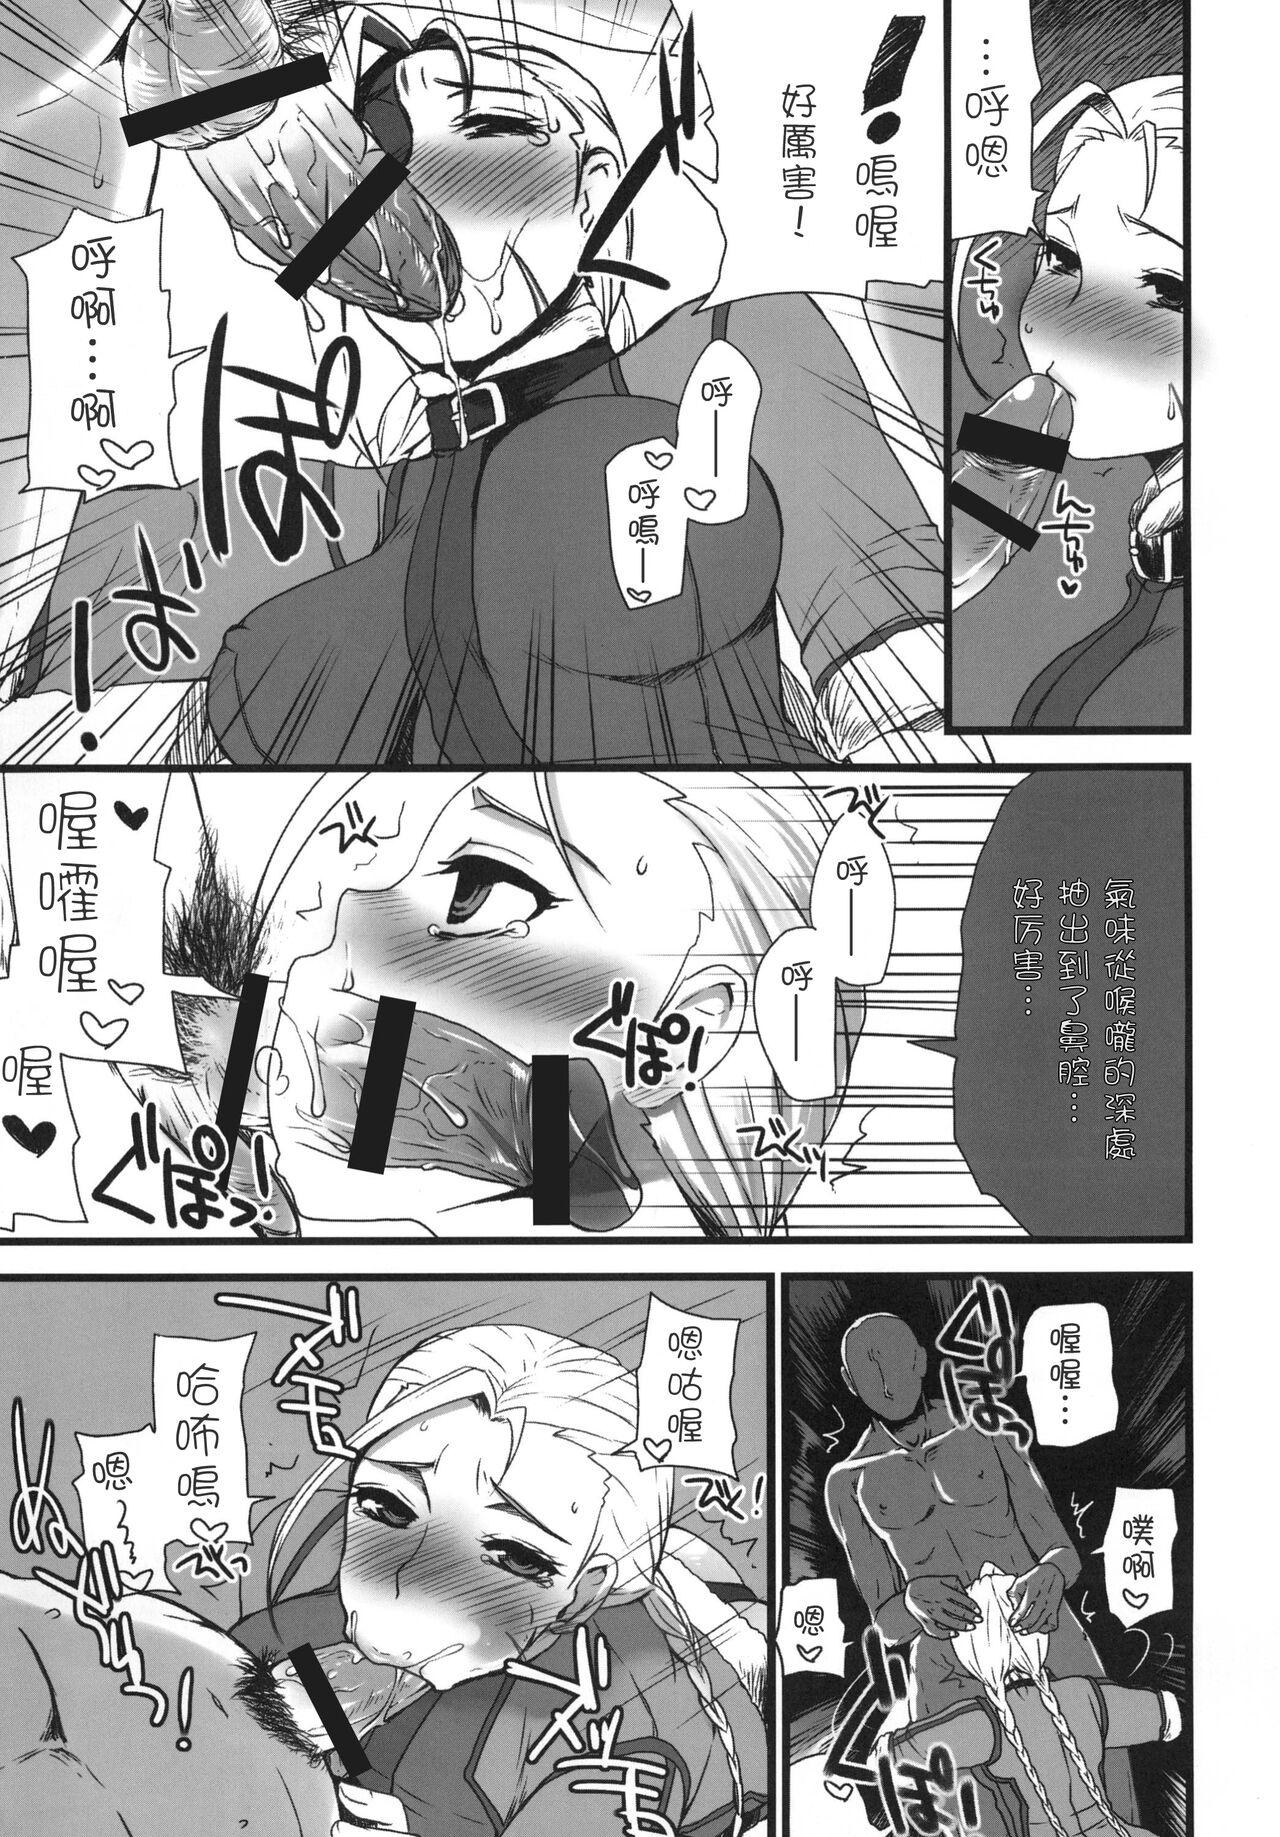  Mona-Lisa Overdrive | 重啟蒙娜麗莎 - Street fighter Audition - Page 7